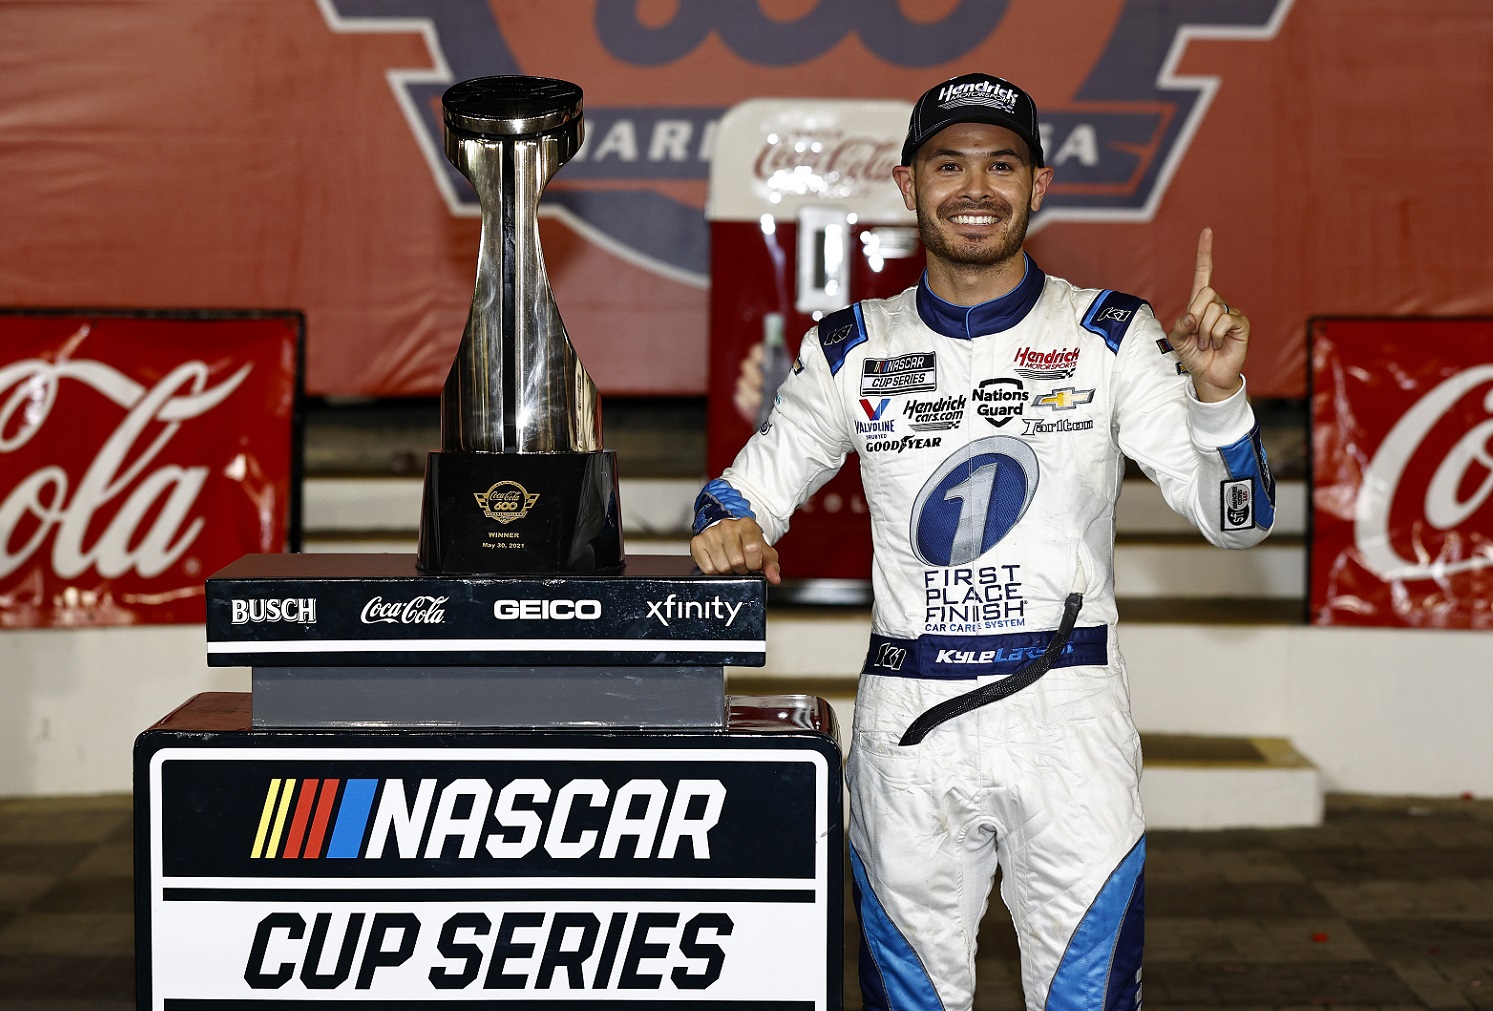 Kyle Larson, driver of the Hendricks Motorsports No. 5 Chevrolet, celebrates in victory lane after winning the NASCAR Cup Series Coca-Cola 600,